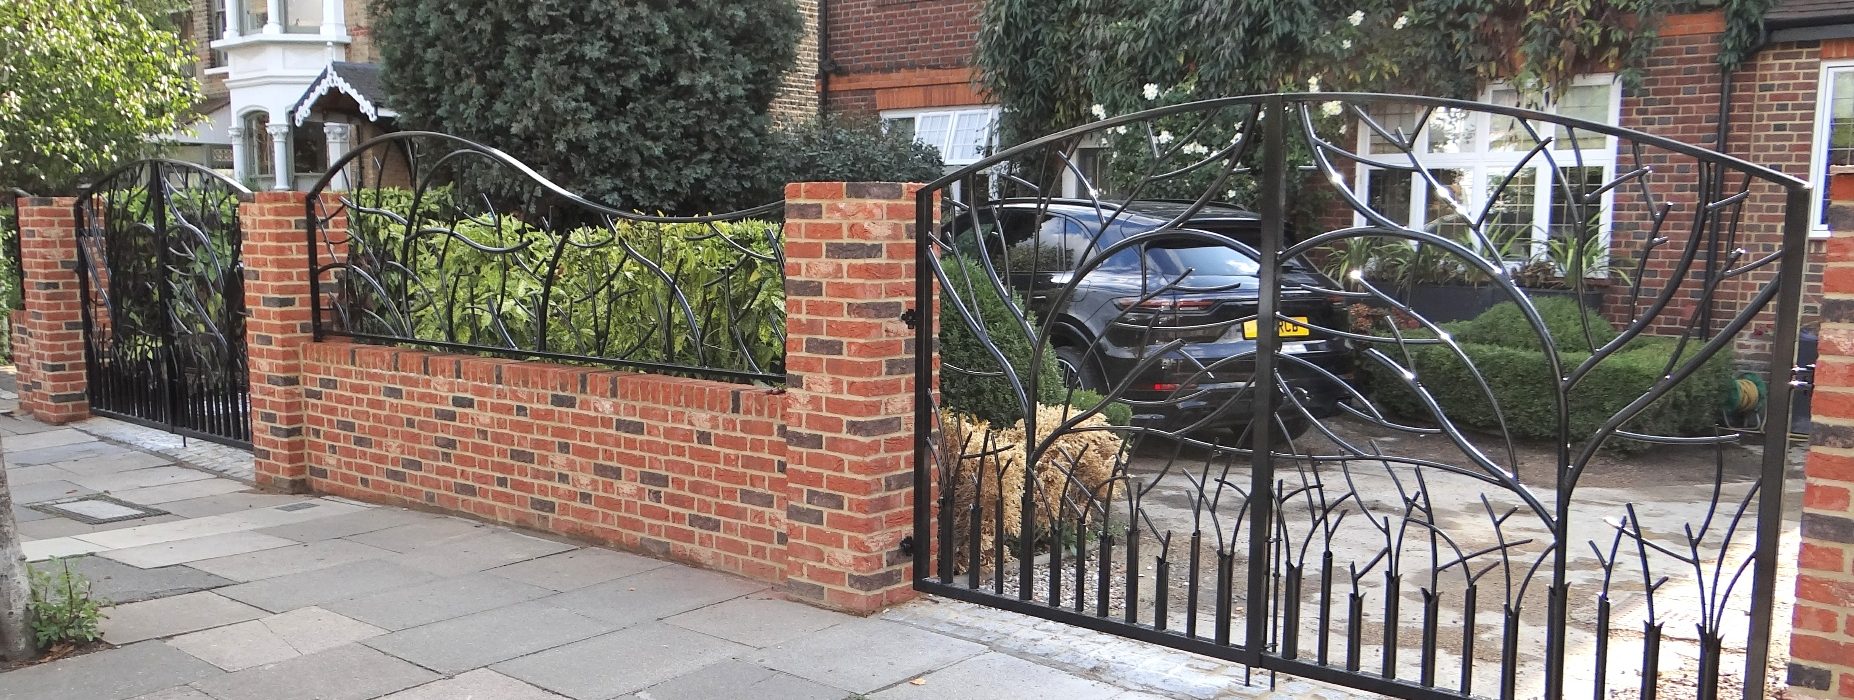 Bespoke wrought iron gates made and fitted by The Blacksmith Shop.